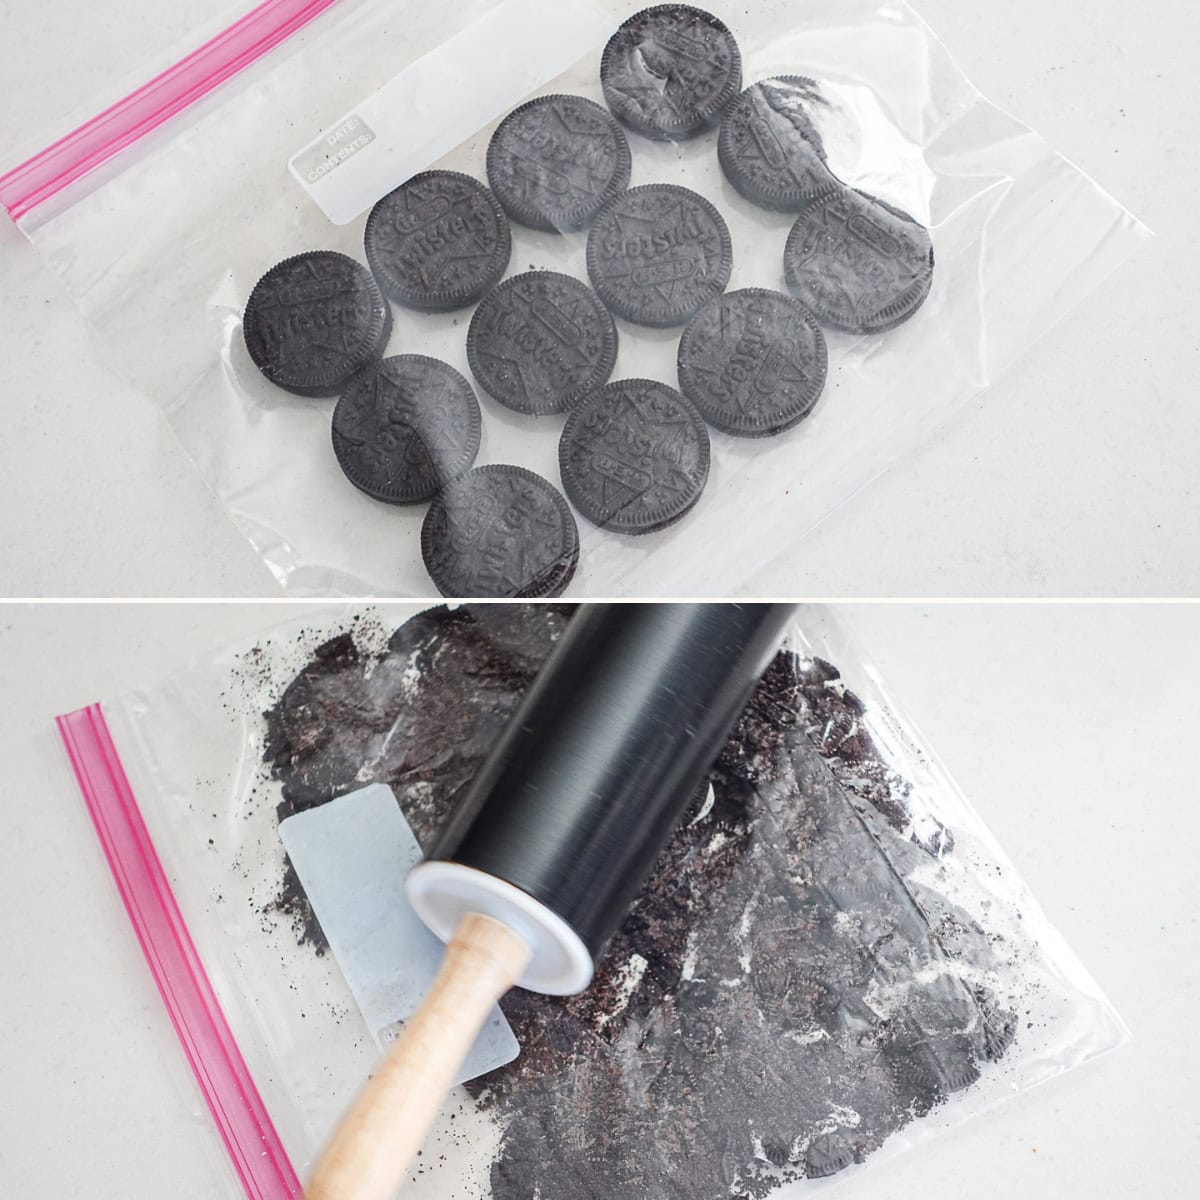 Crushing Oreos in a bag before and after photos